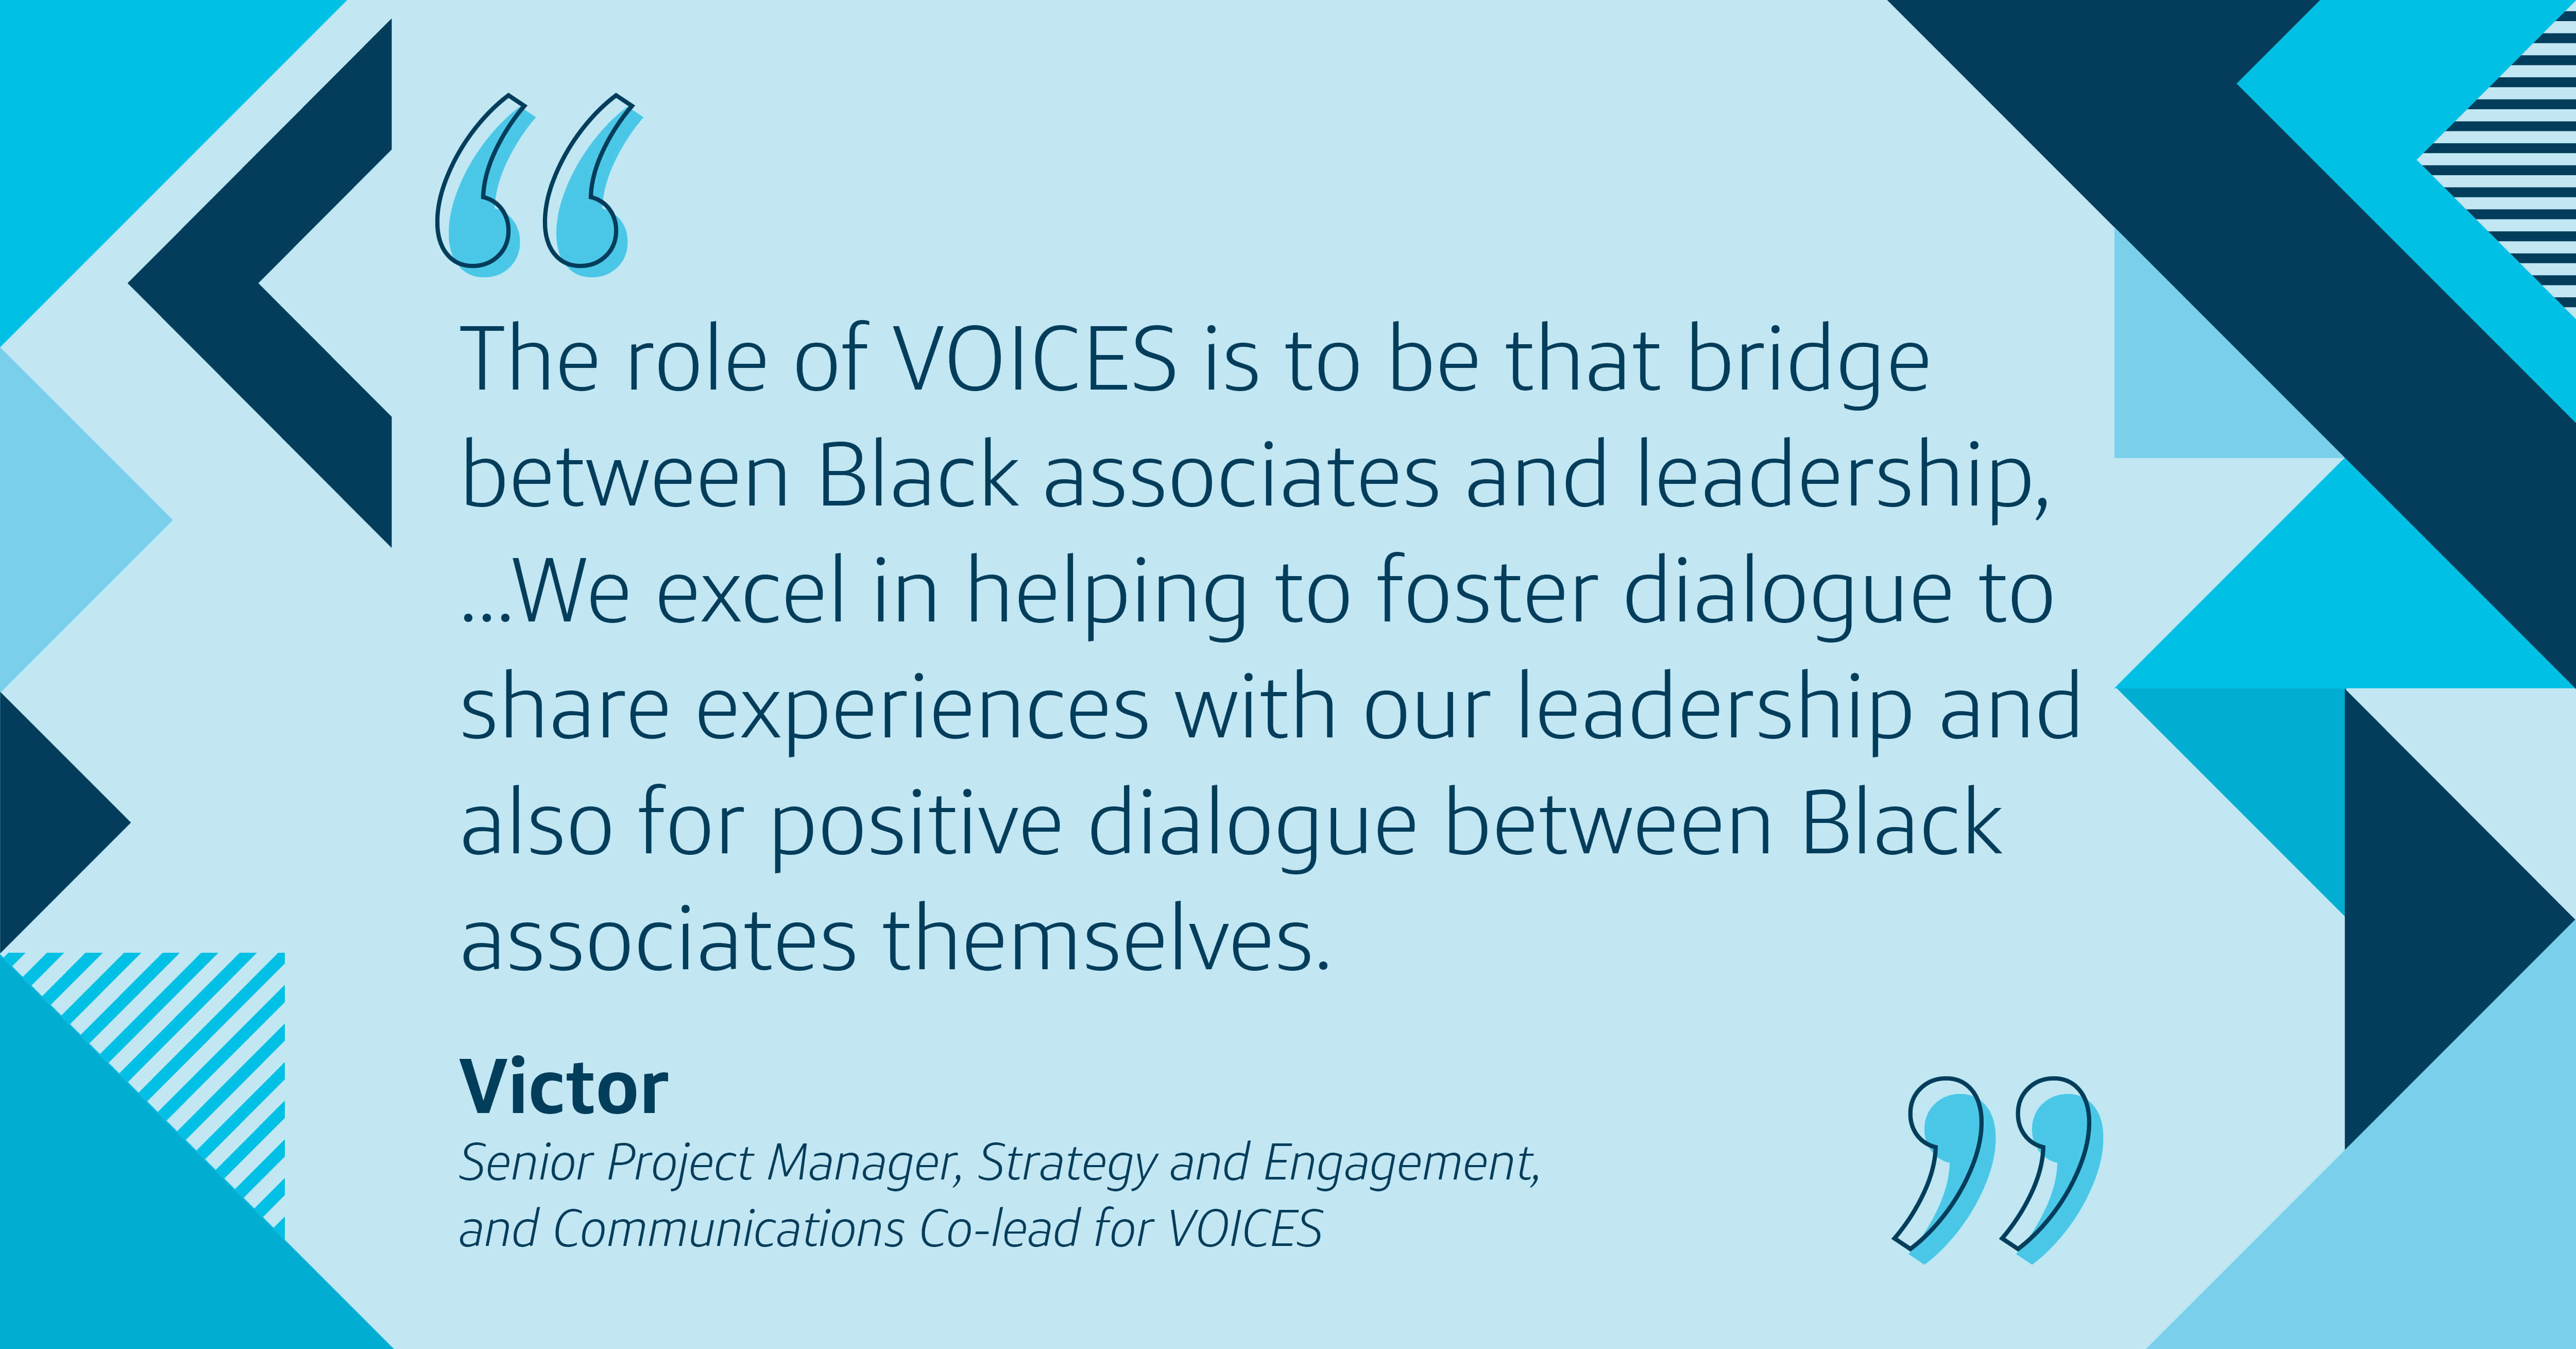 “The role of VOICES at Capital One is to be that bridge between Black associates and leadership. We excel in helping to foster dialogue to share experiences with our leadership and also for positive dialogue between Black associates themselves.”